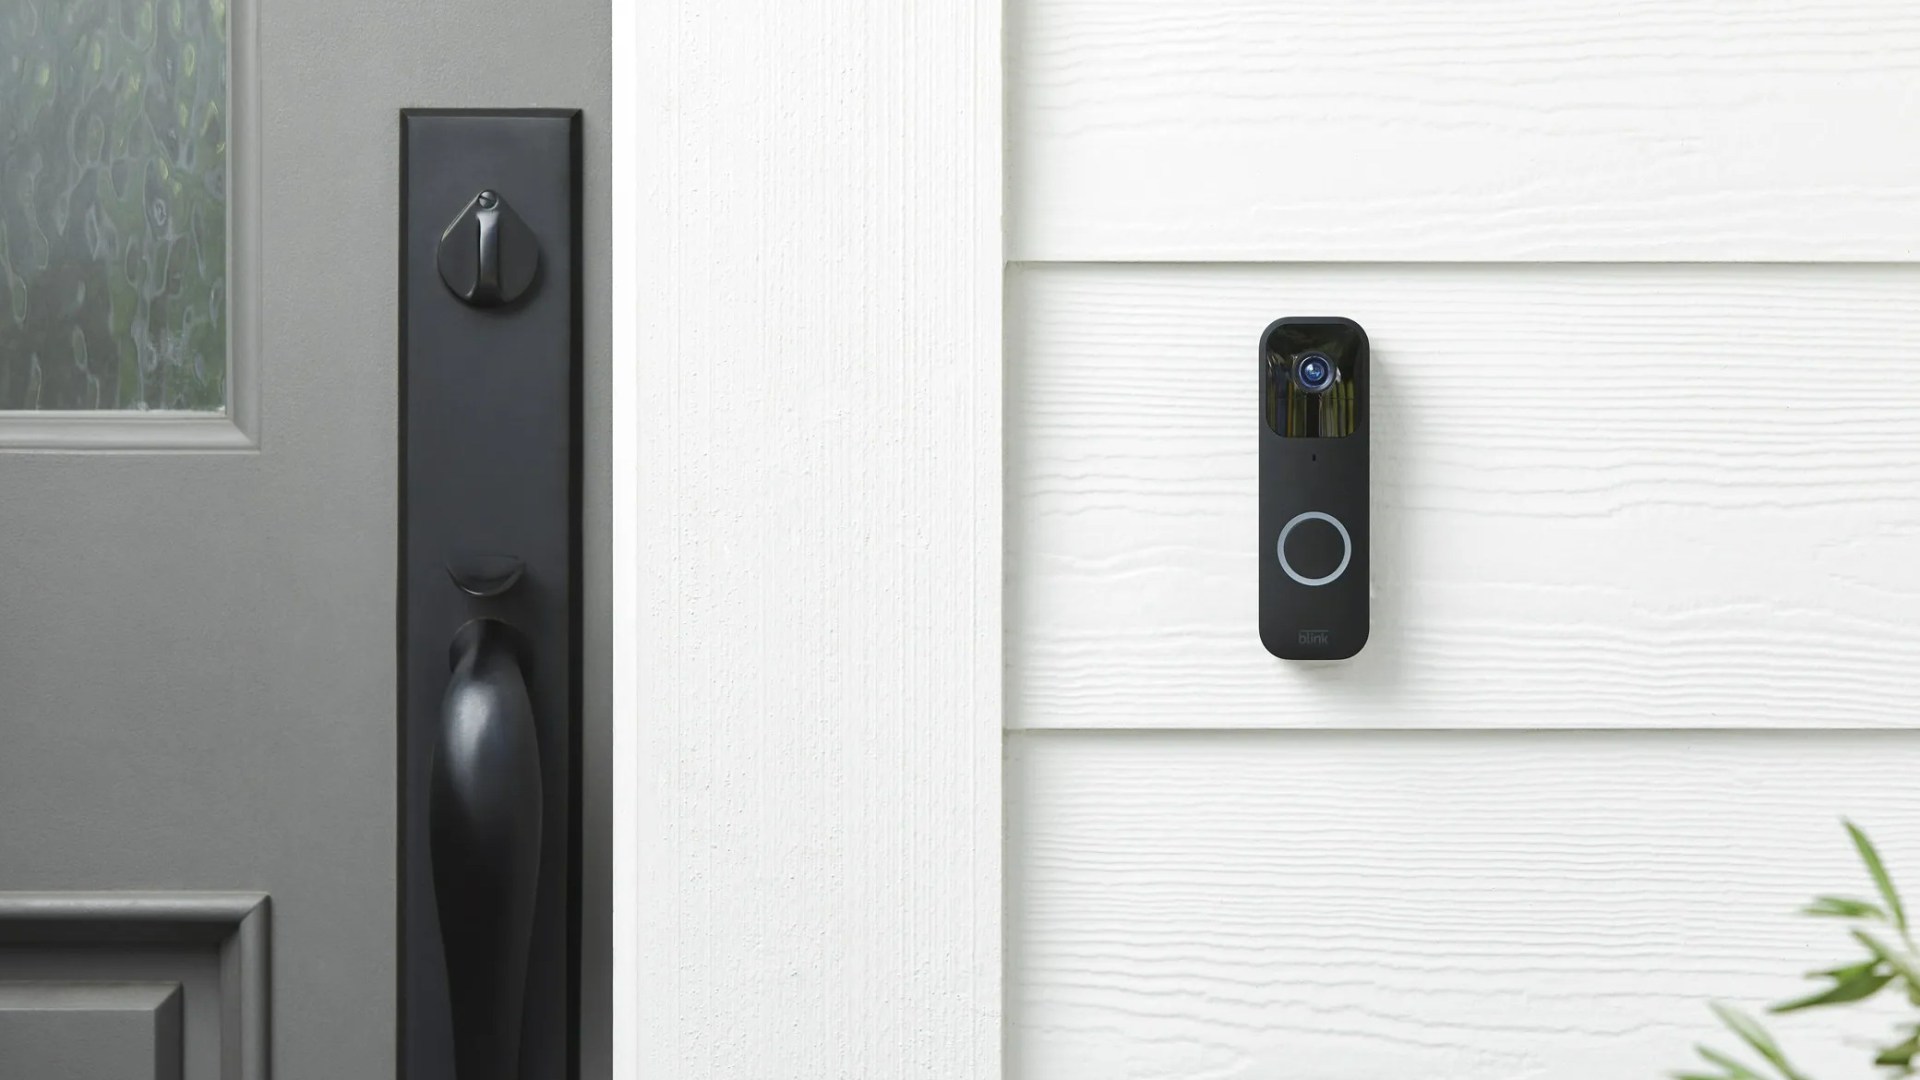 I Swapped My Ring Doorbell for an Affordable Amazon Alternative – Longer Battery Life and No Subscription Required